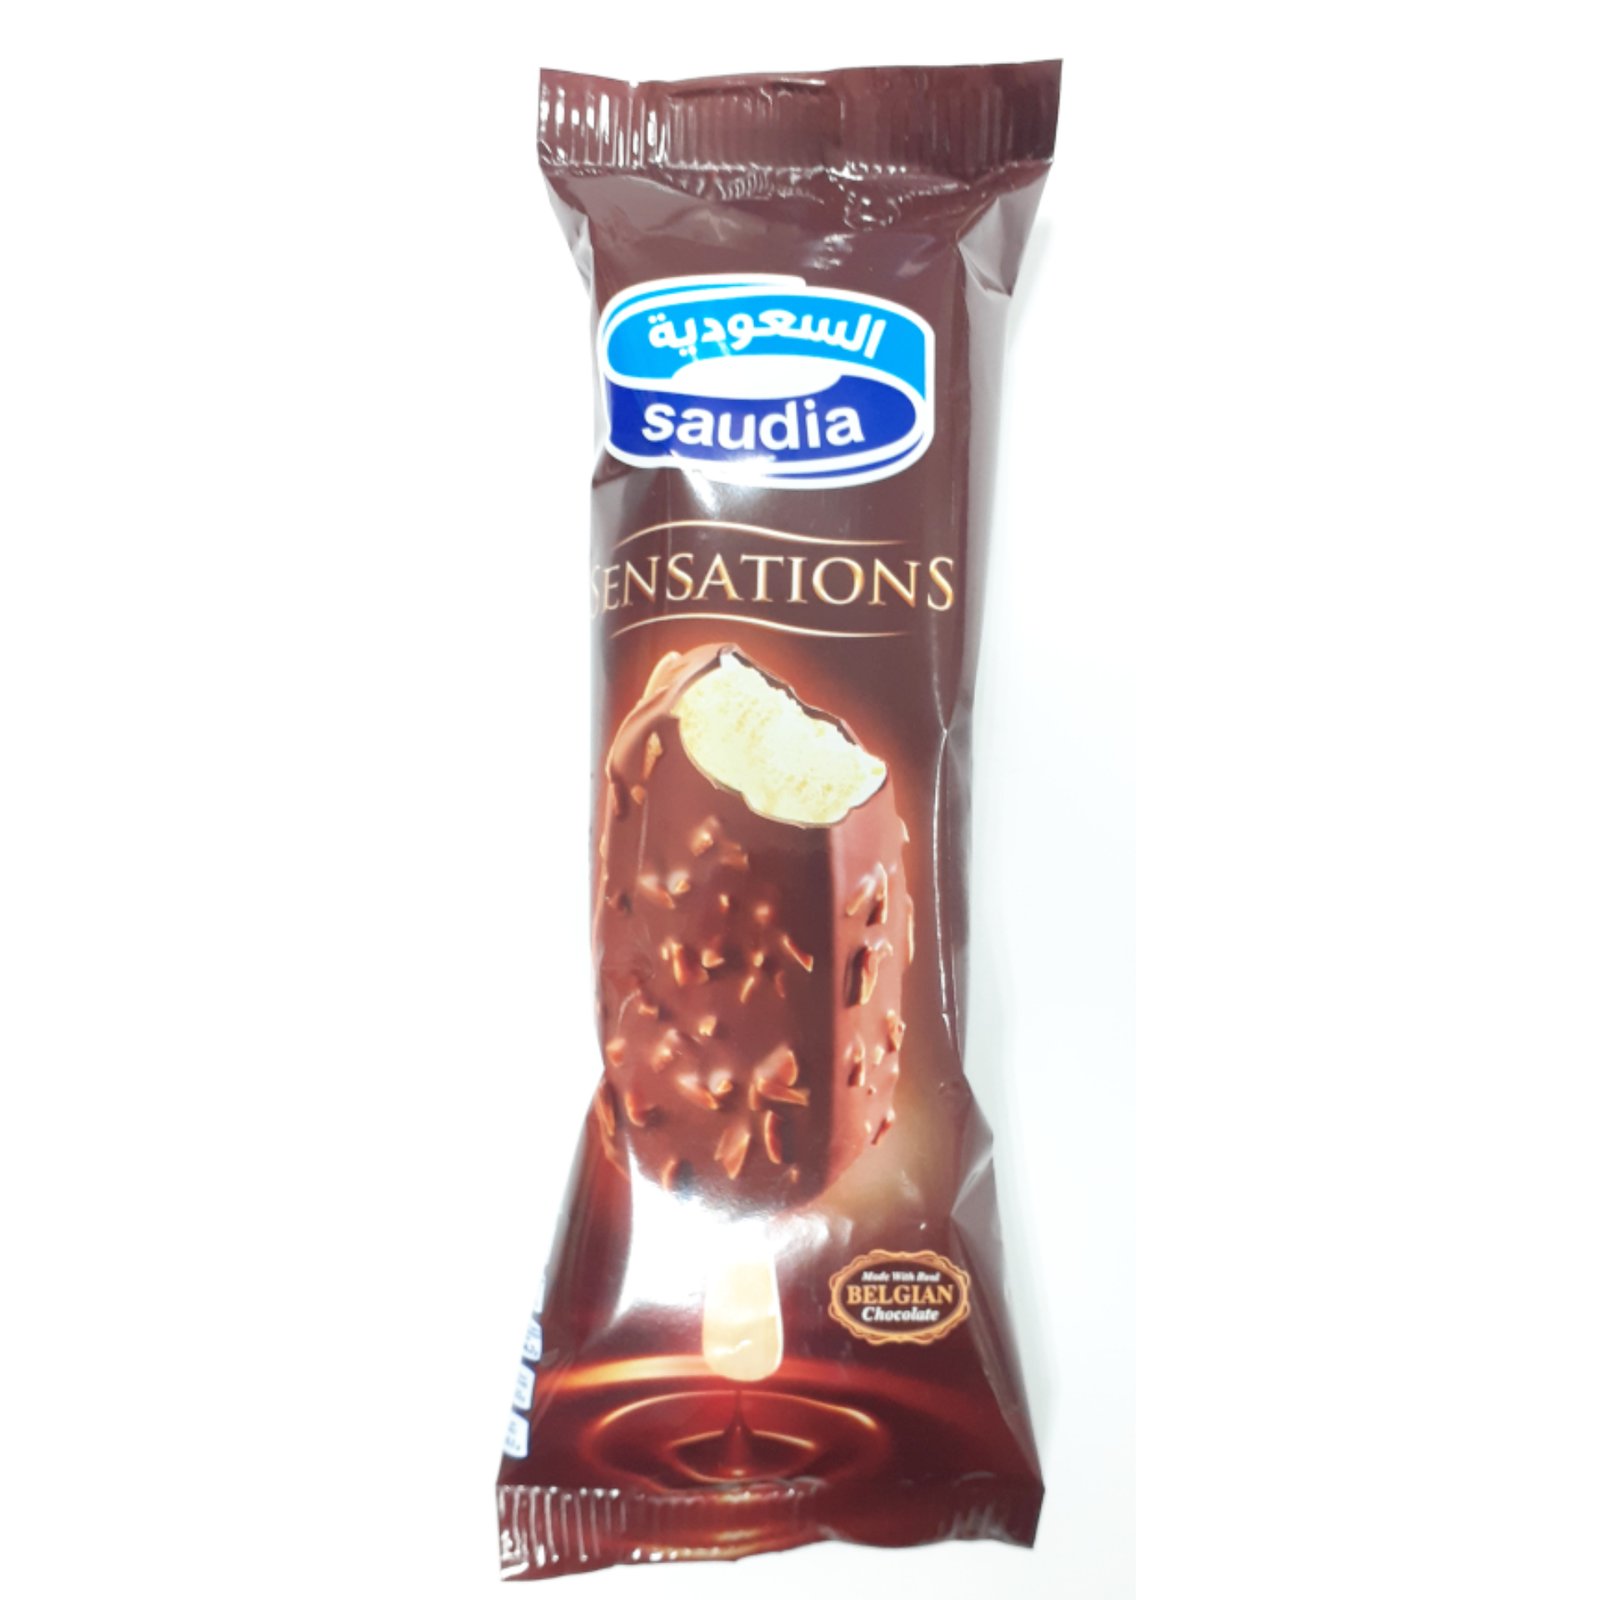 Ice cream with chocolate and almond flavor105ml Alsauidiah